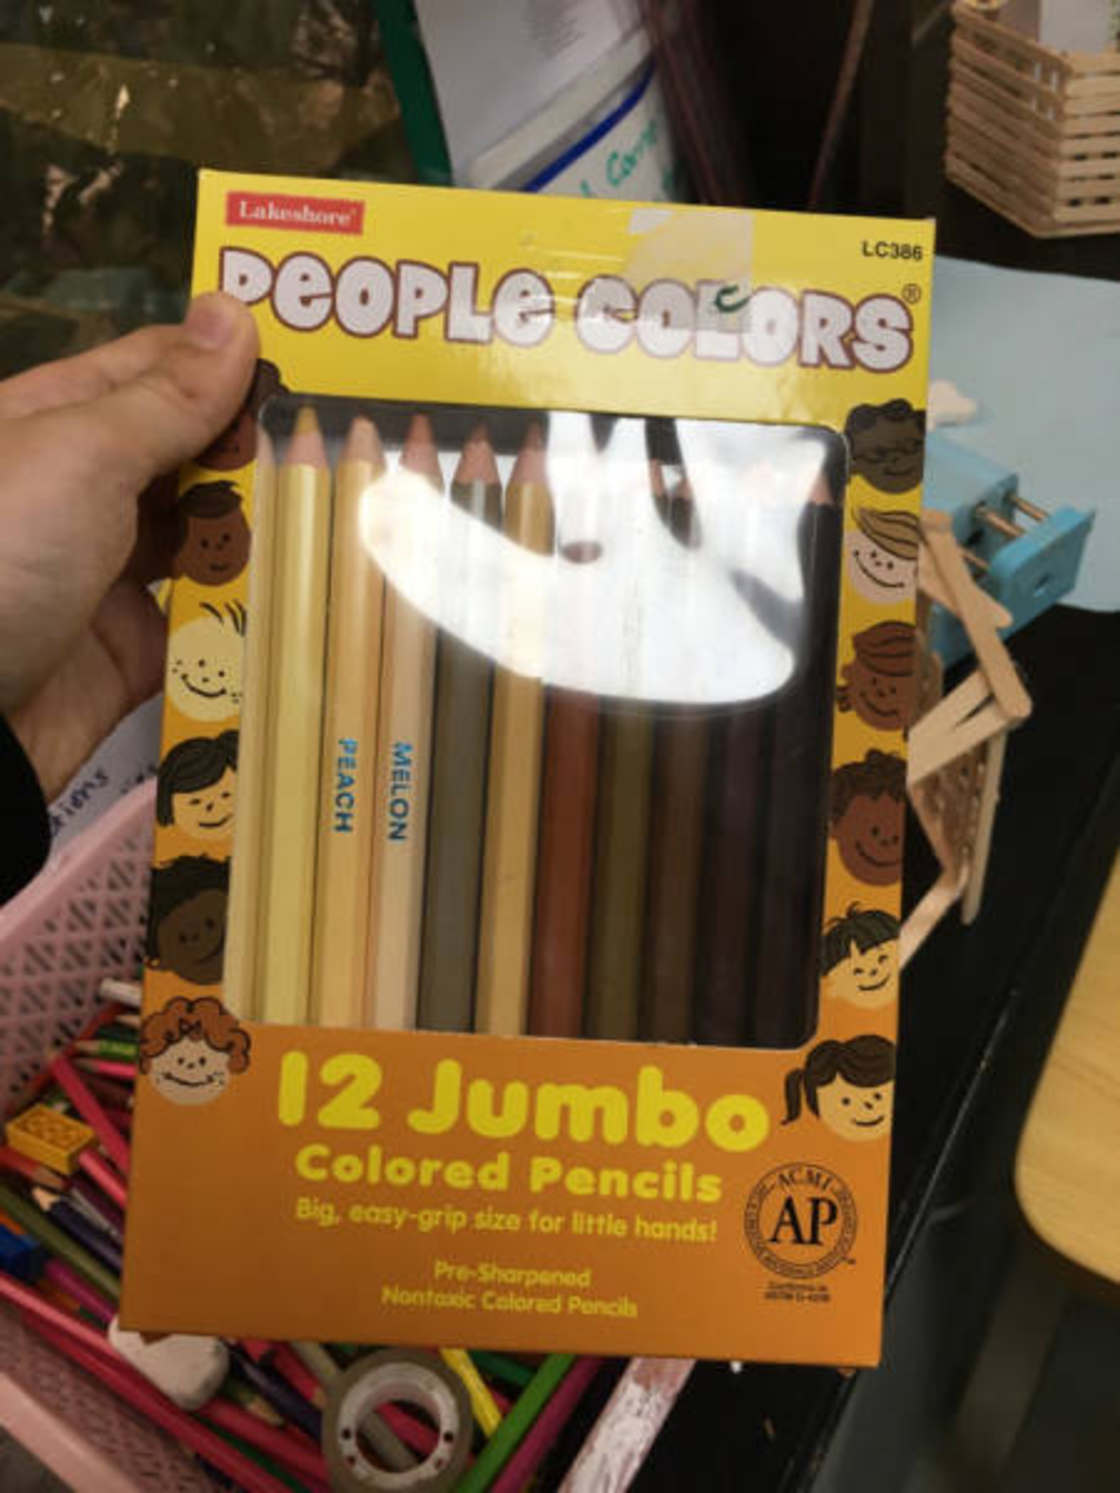 Lakbare LC386 Deople Cors Peach Melon 12 Jumbo Colored Pencils Cnc Big, easygrip size for little hands! Ap PreSharpened Nocasc Colored Pencil